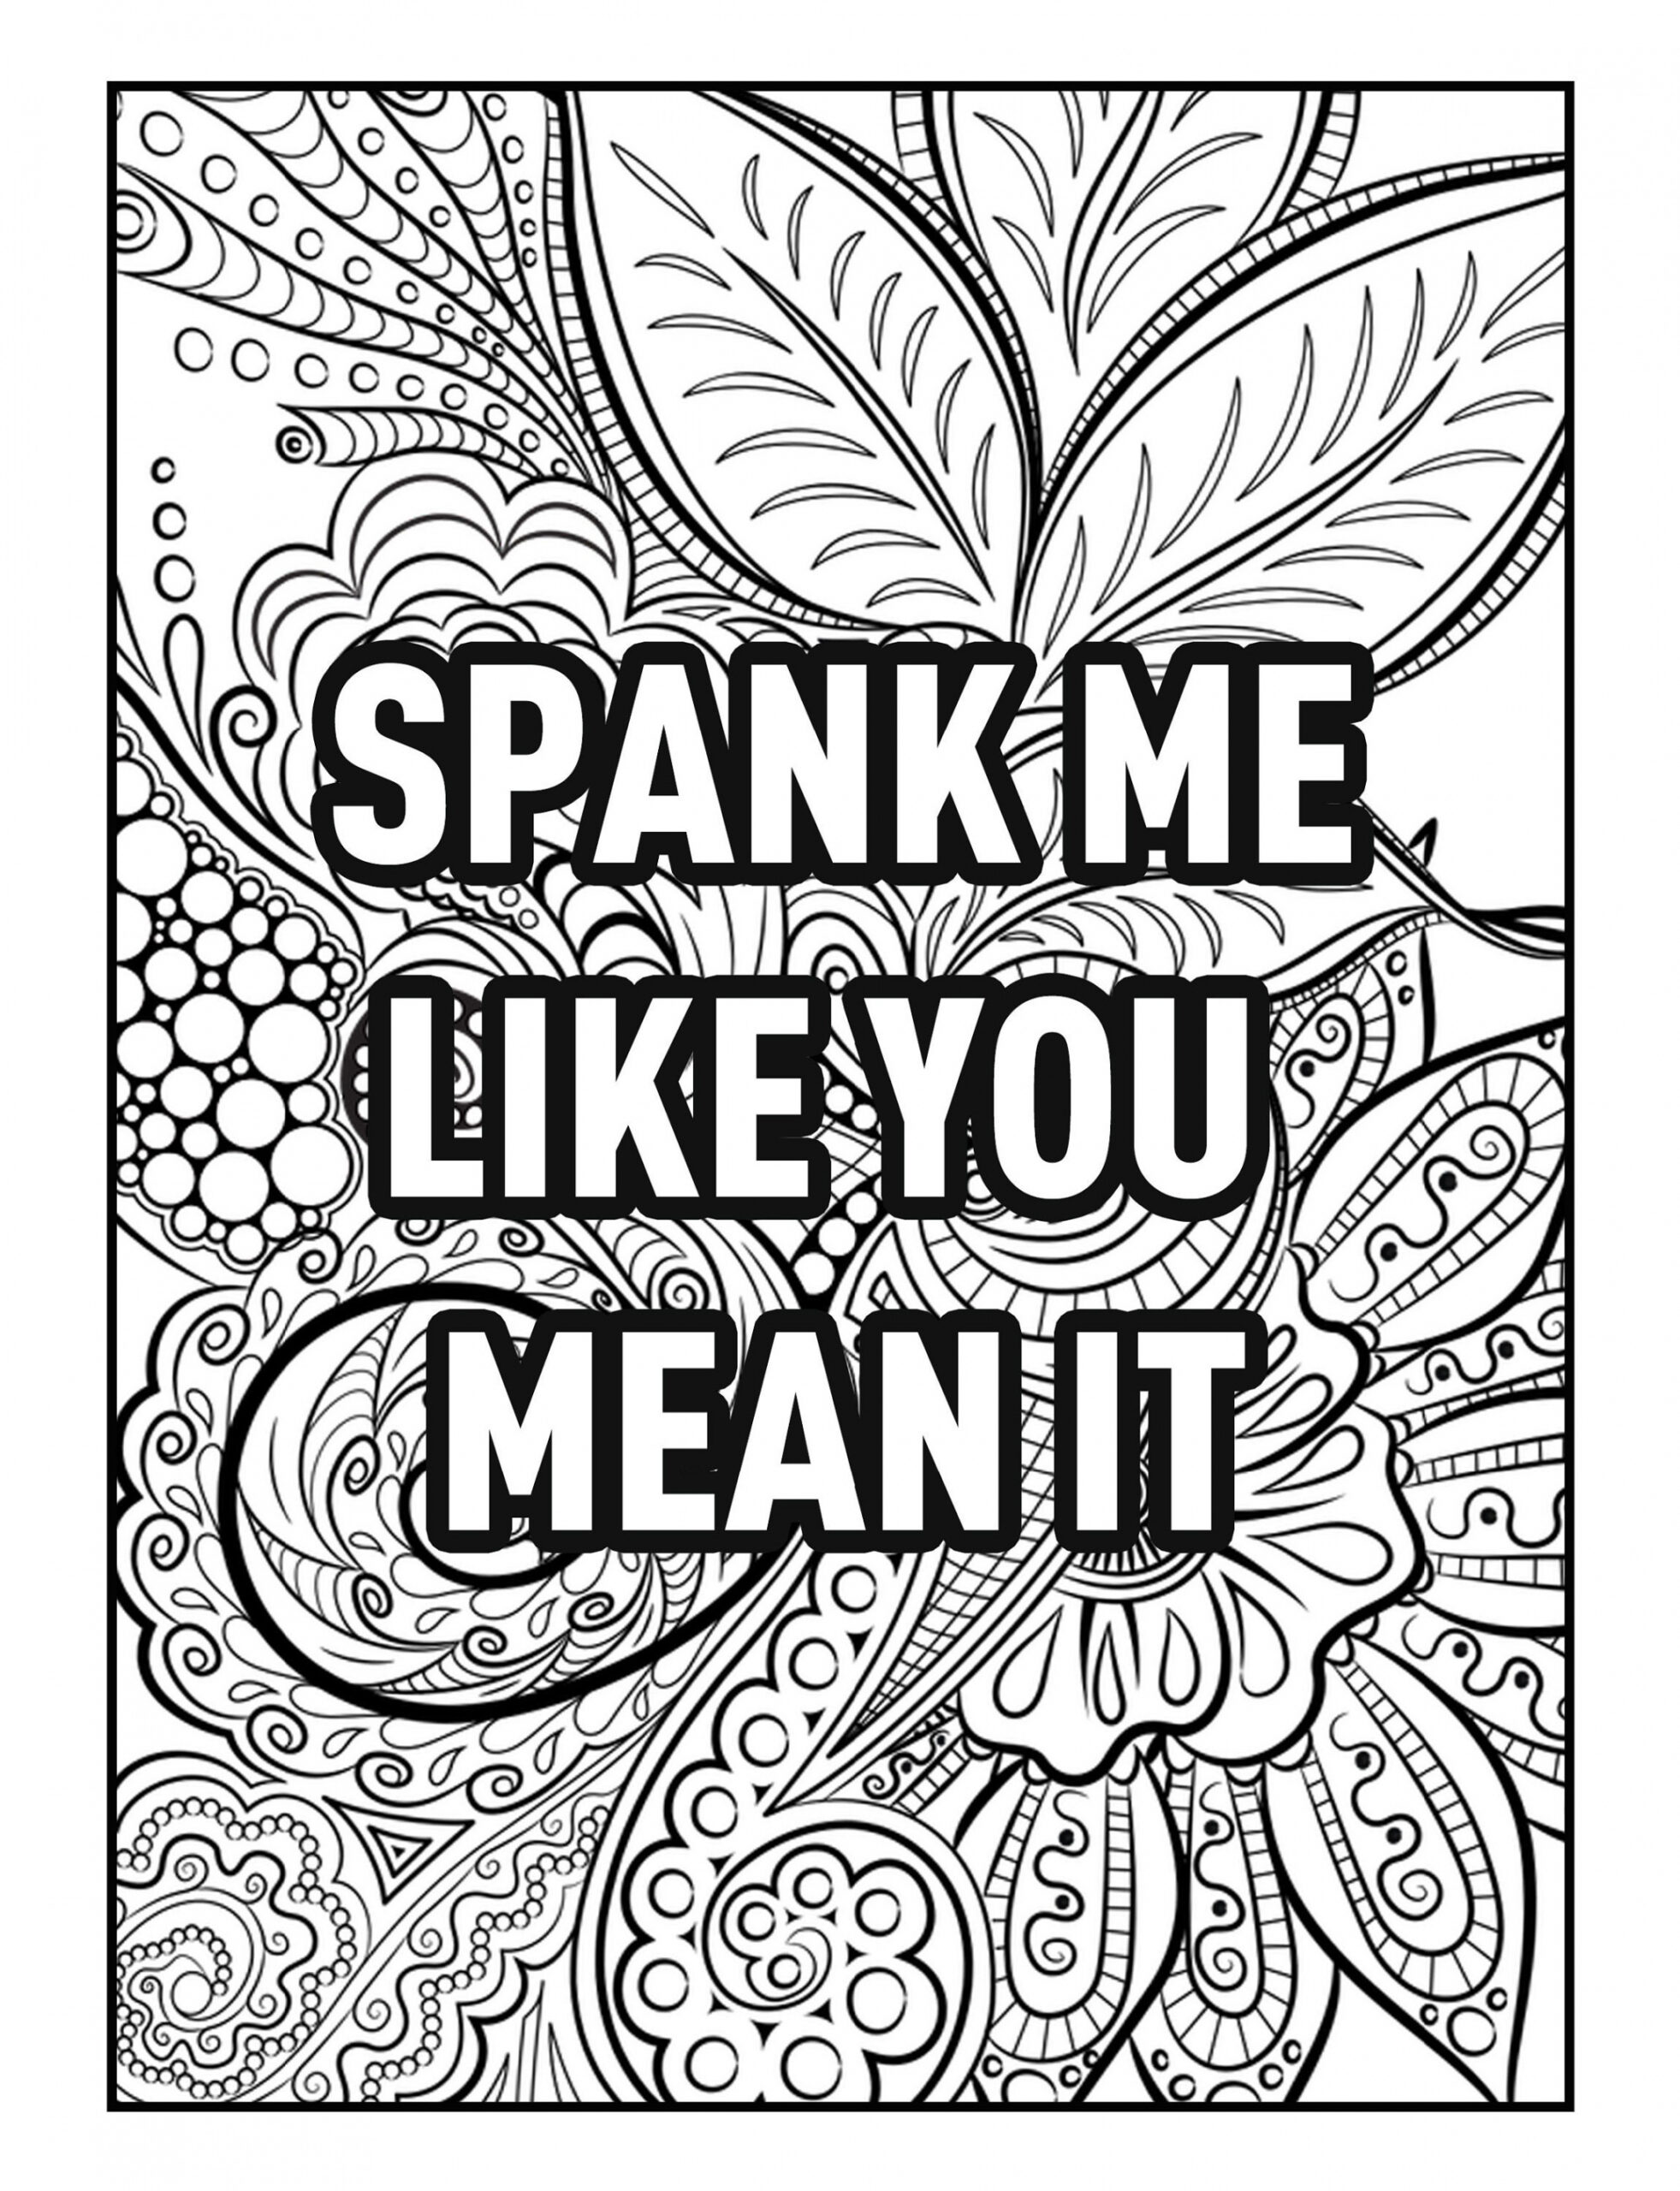 Free Printable Inappropriate Coloring Pages For Adults - Printable -  Dirty Funny Coloring Pages for Adults Adult Coloring Book - Etsy